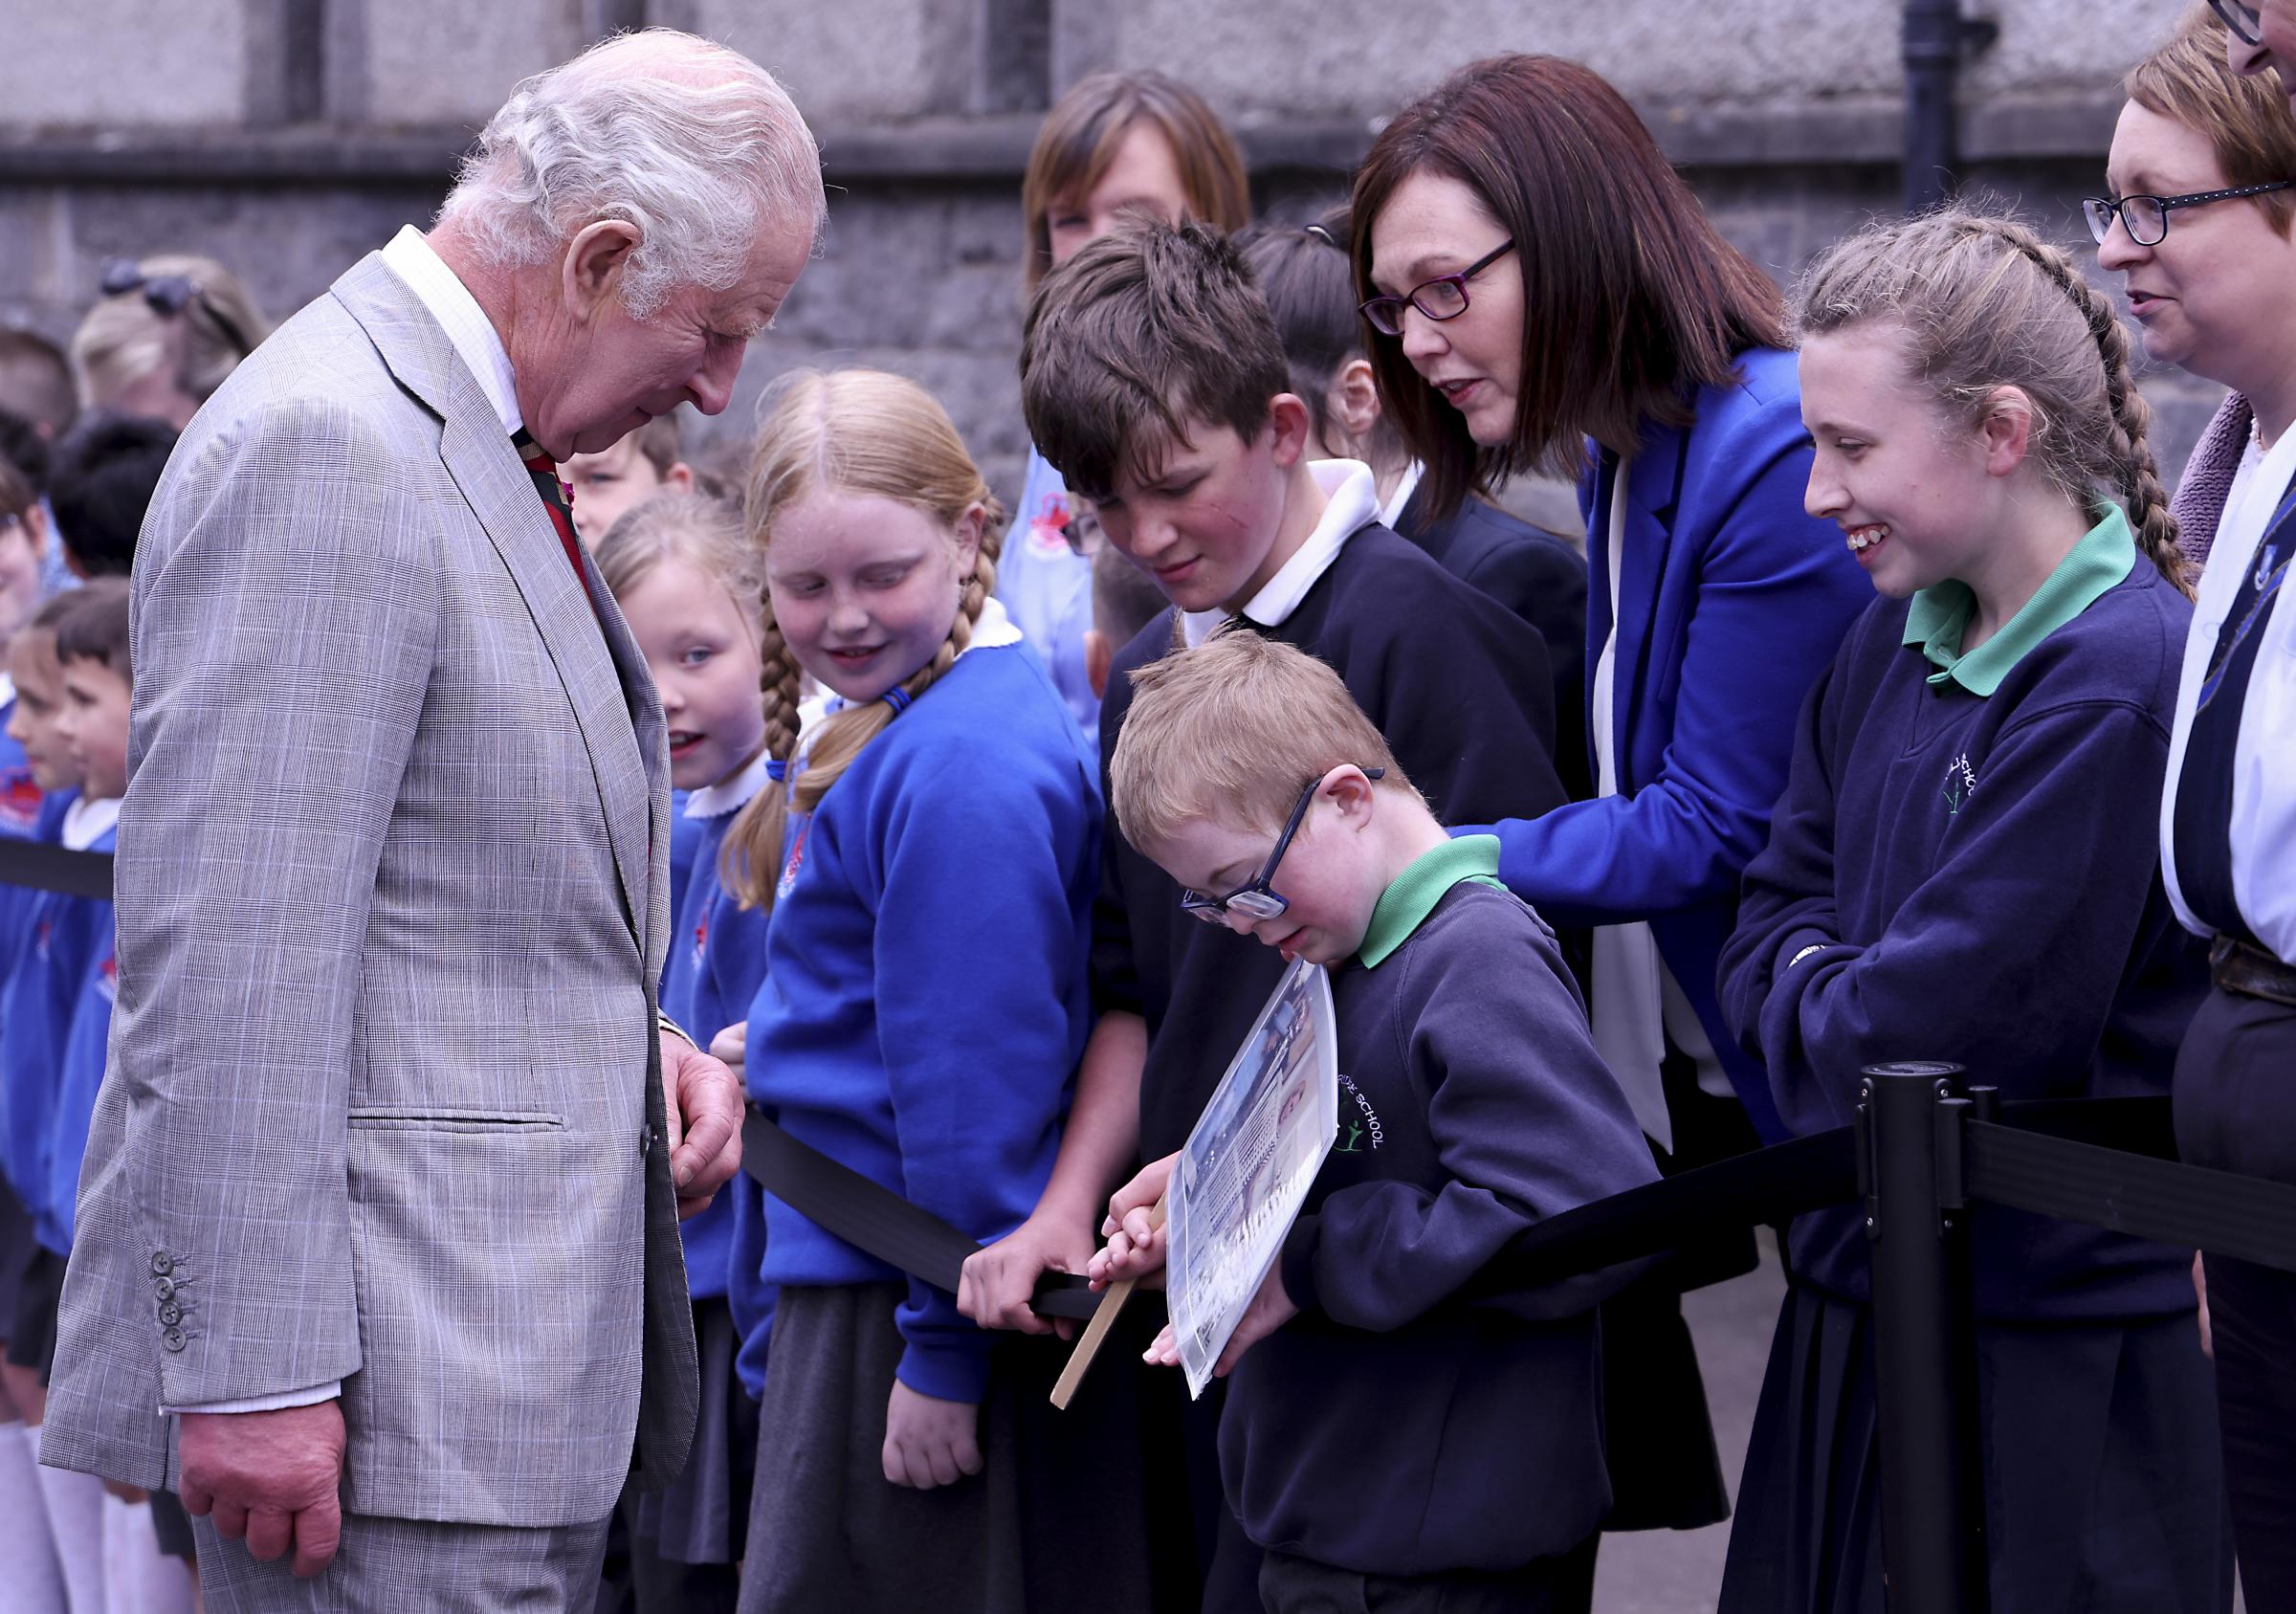 King Charles III meest a pupil from Willowbridge School.